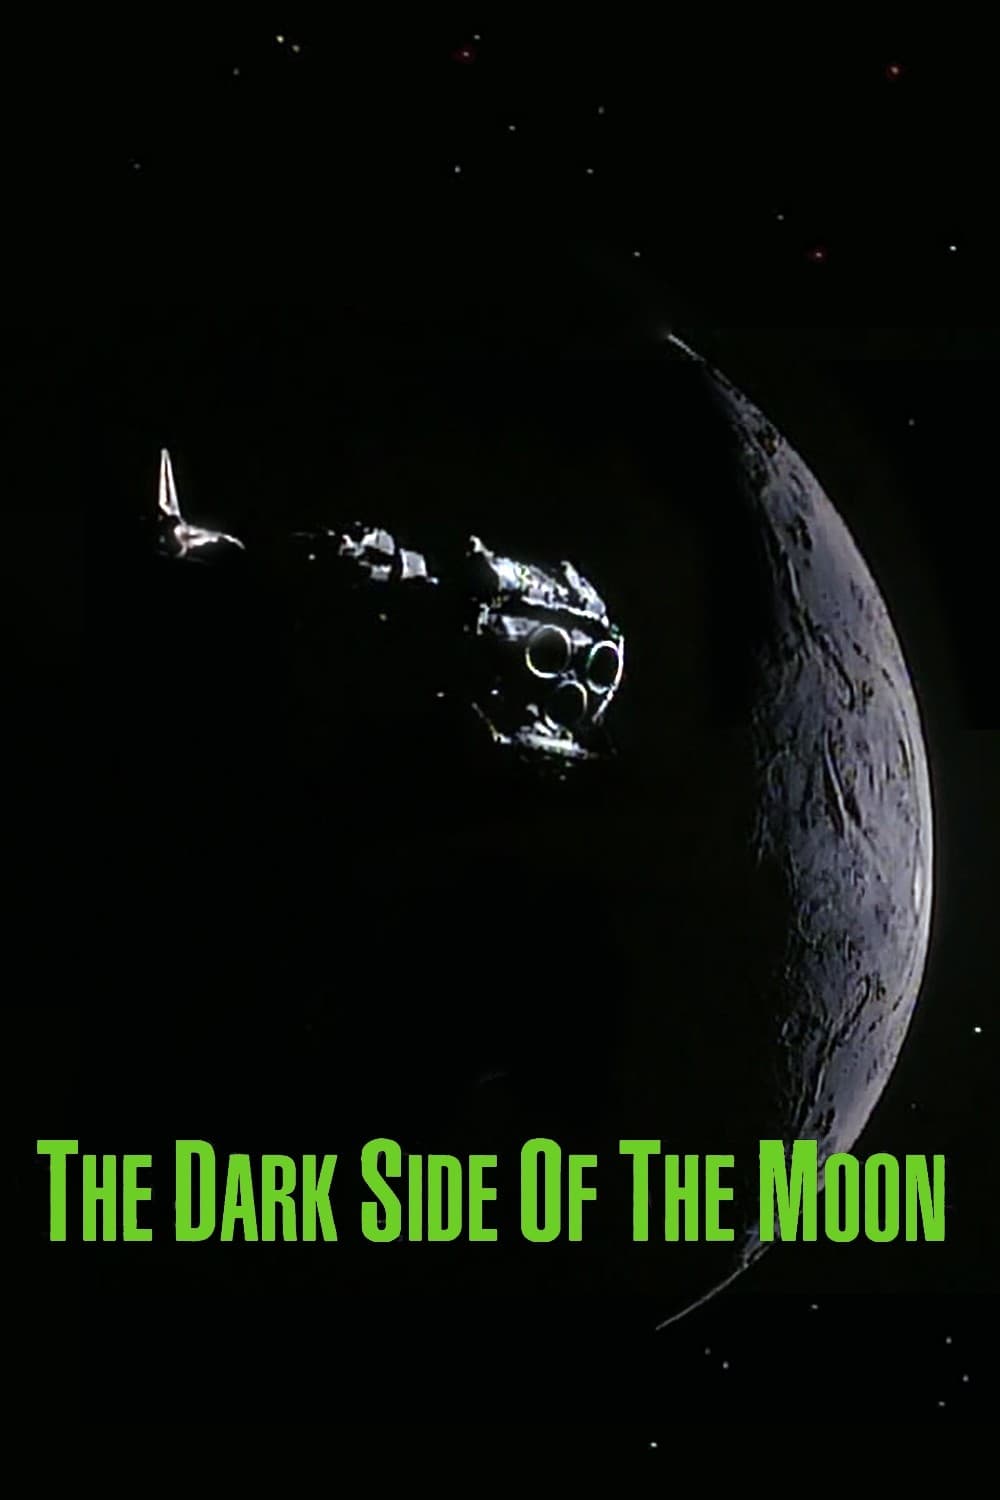 the dark side of the moon movie review